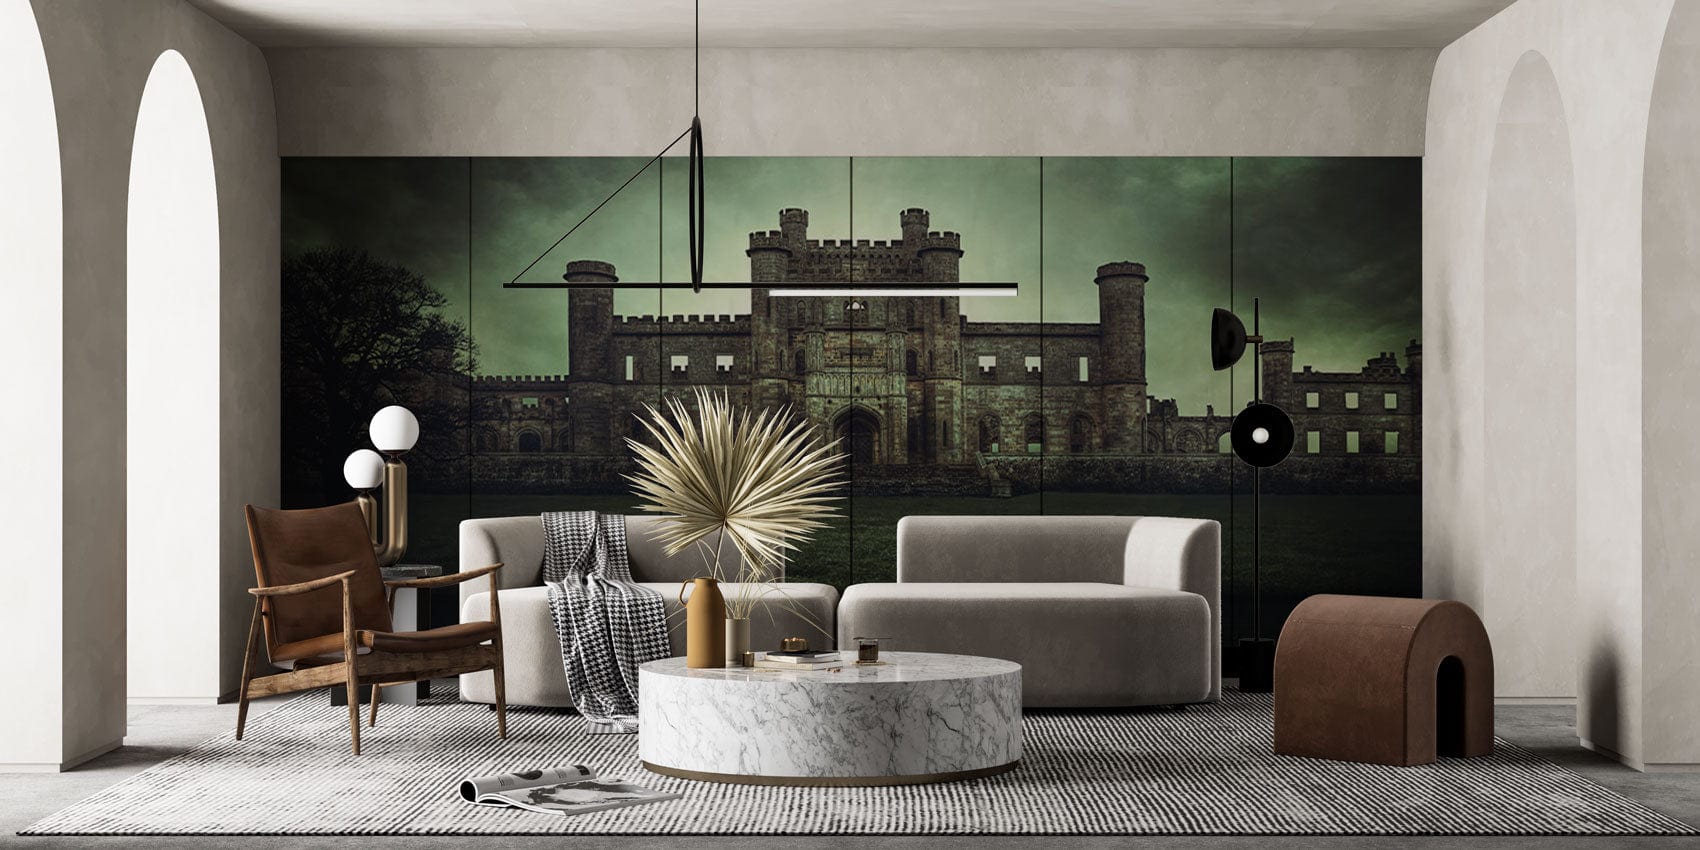 Wallpaper mural featuring the Lowther Castle and Gardens Scenery for use in decorating a living room